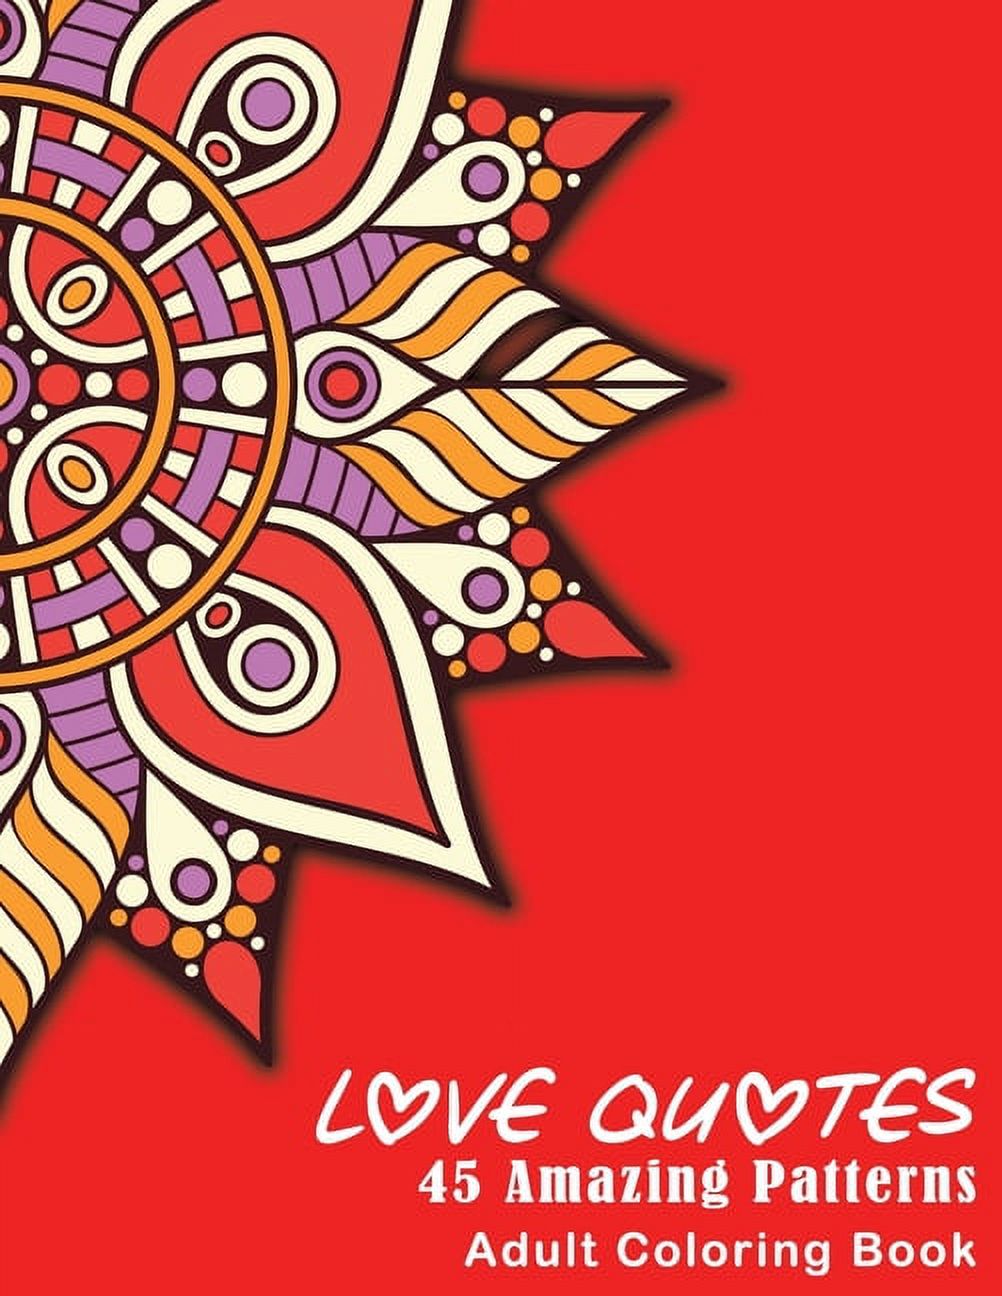 Love Quotes : An Inspirational Adult Coloring Book, Featuring 45 Beautiful Love Quotes With Amazing Mandalas Designed to Soothe the Soul, Single-Sided Designs, for Good Vibes of Love and Romance (Paperback) - image 1 of 1